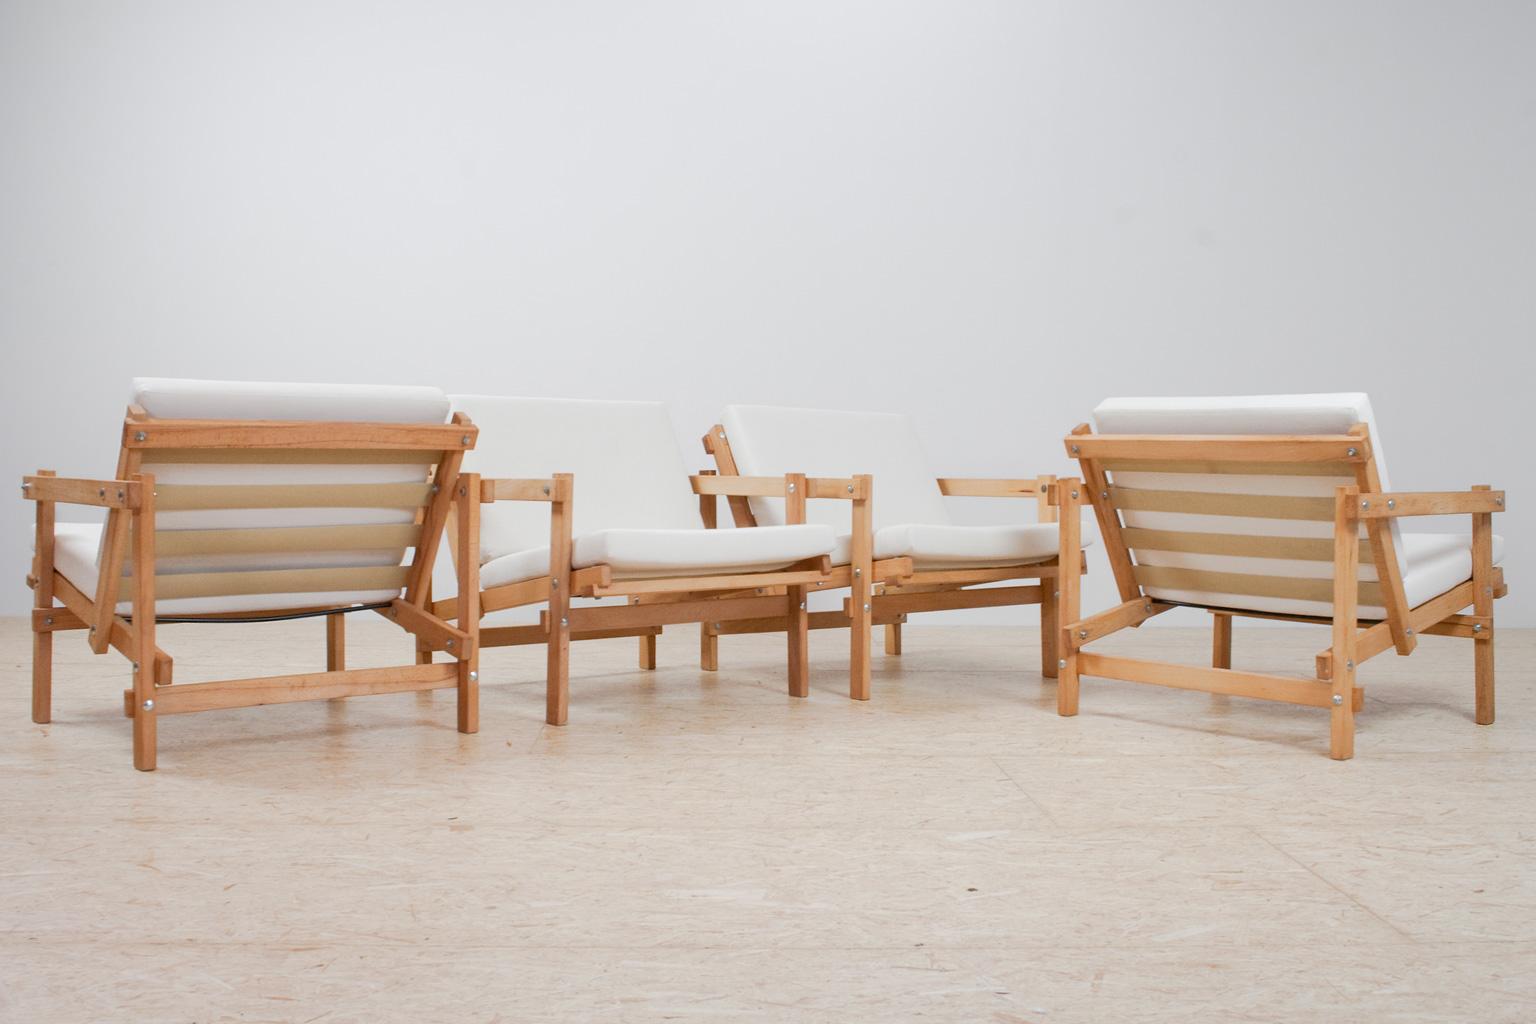 Great visual constructed set of four lounge chairs in beautiful natural beech wood, designed in the 70s by Martin Visser. The geometric shaped chairs have a really great comfort and makes for a visual attractive and quite rare object in your